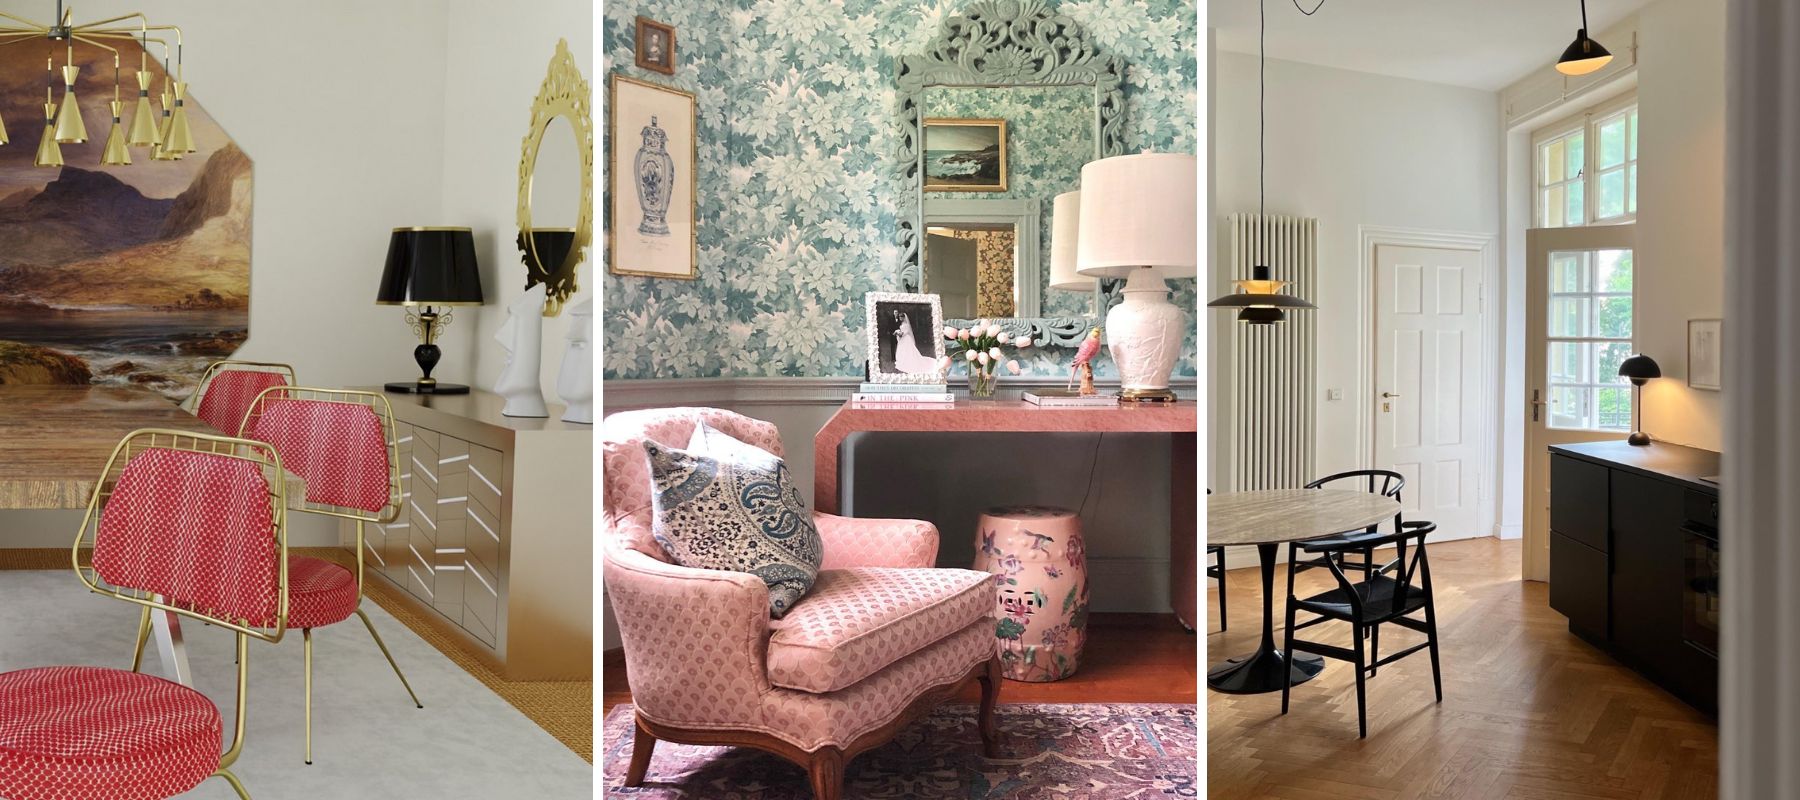 Beige-y or Flashy: Old Money vs New Money Living Spaces